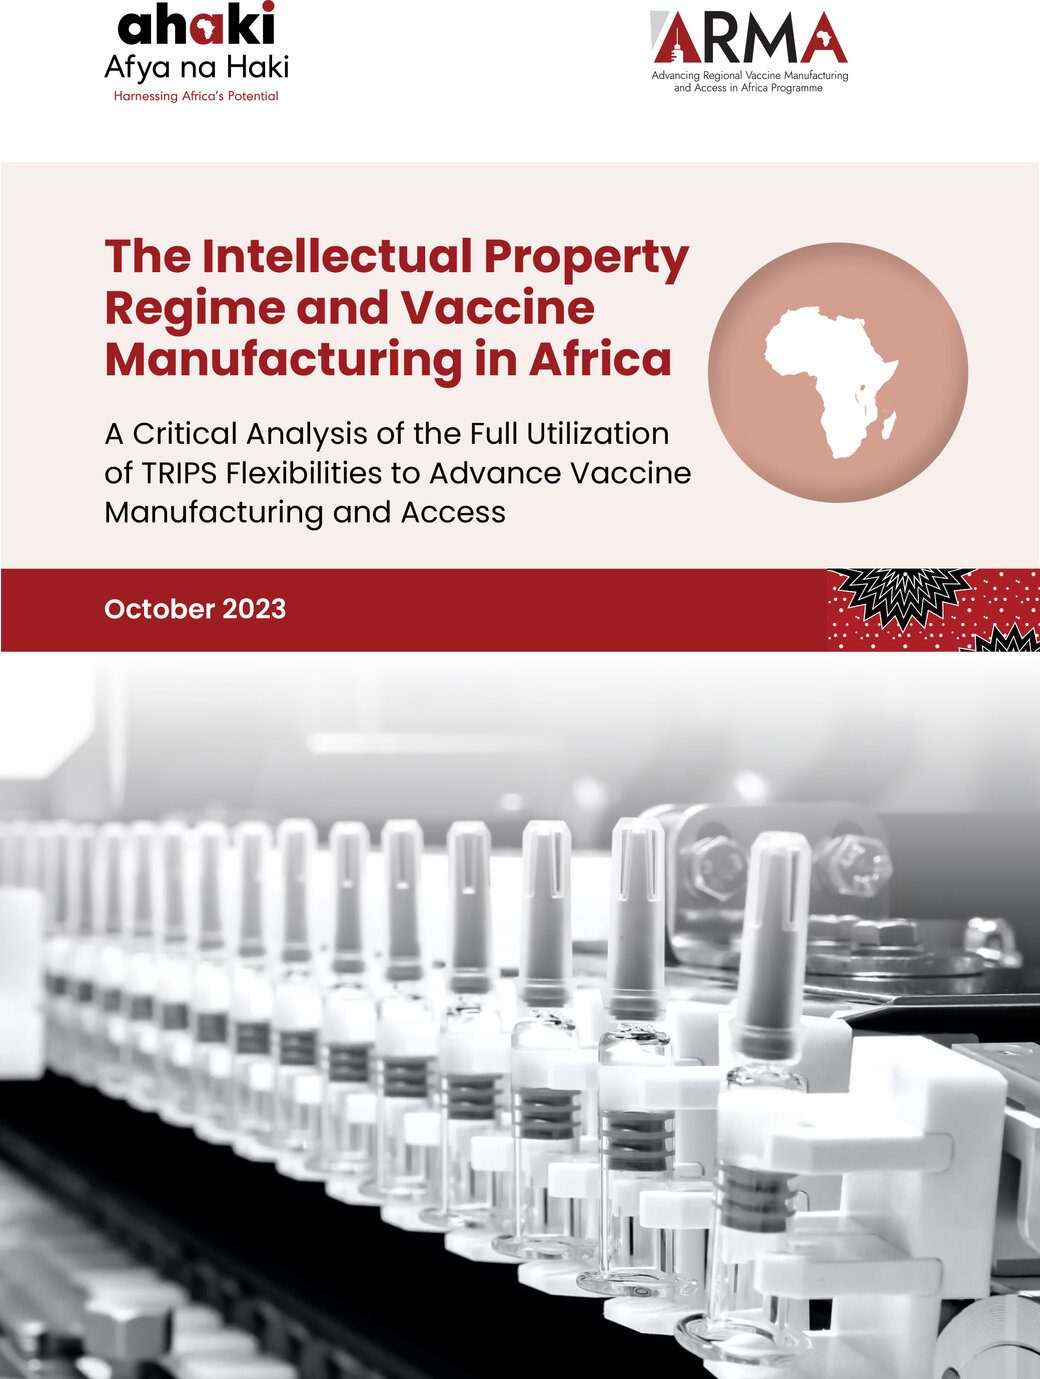 rsz_1the_ip_regime_and_vaccine_manufacturing_in_africa-1